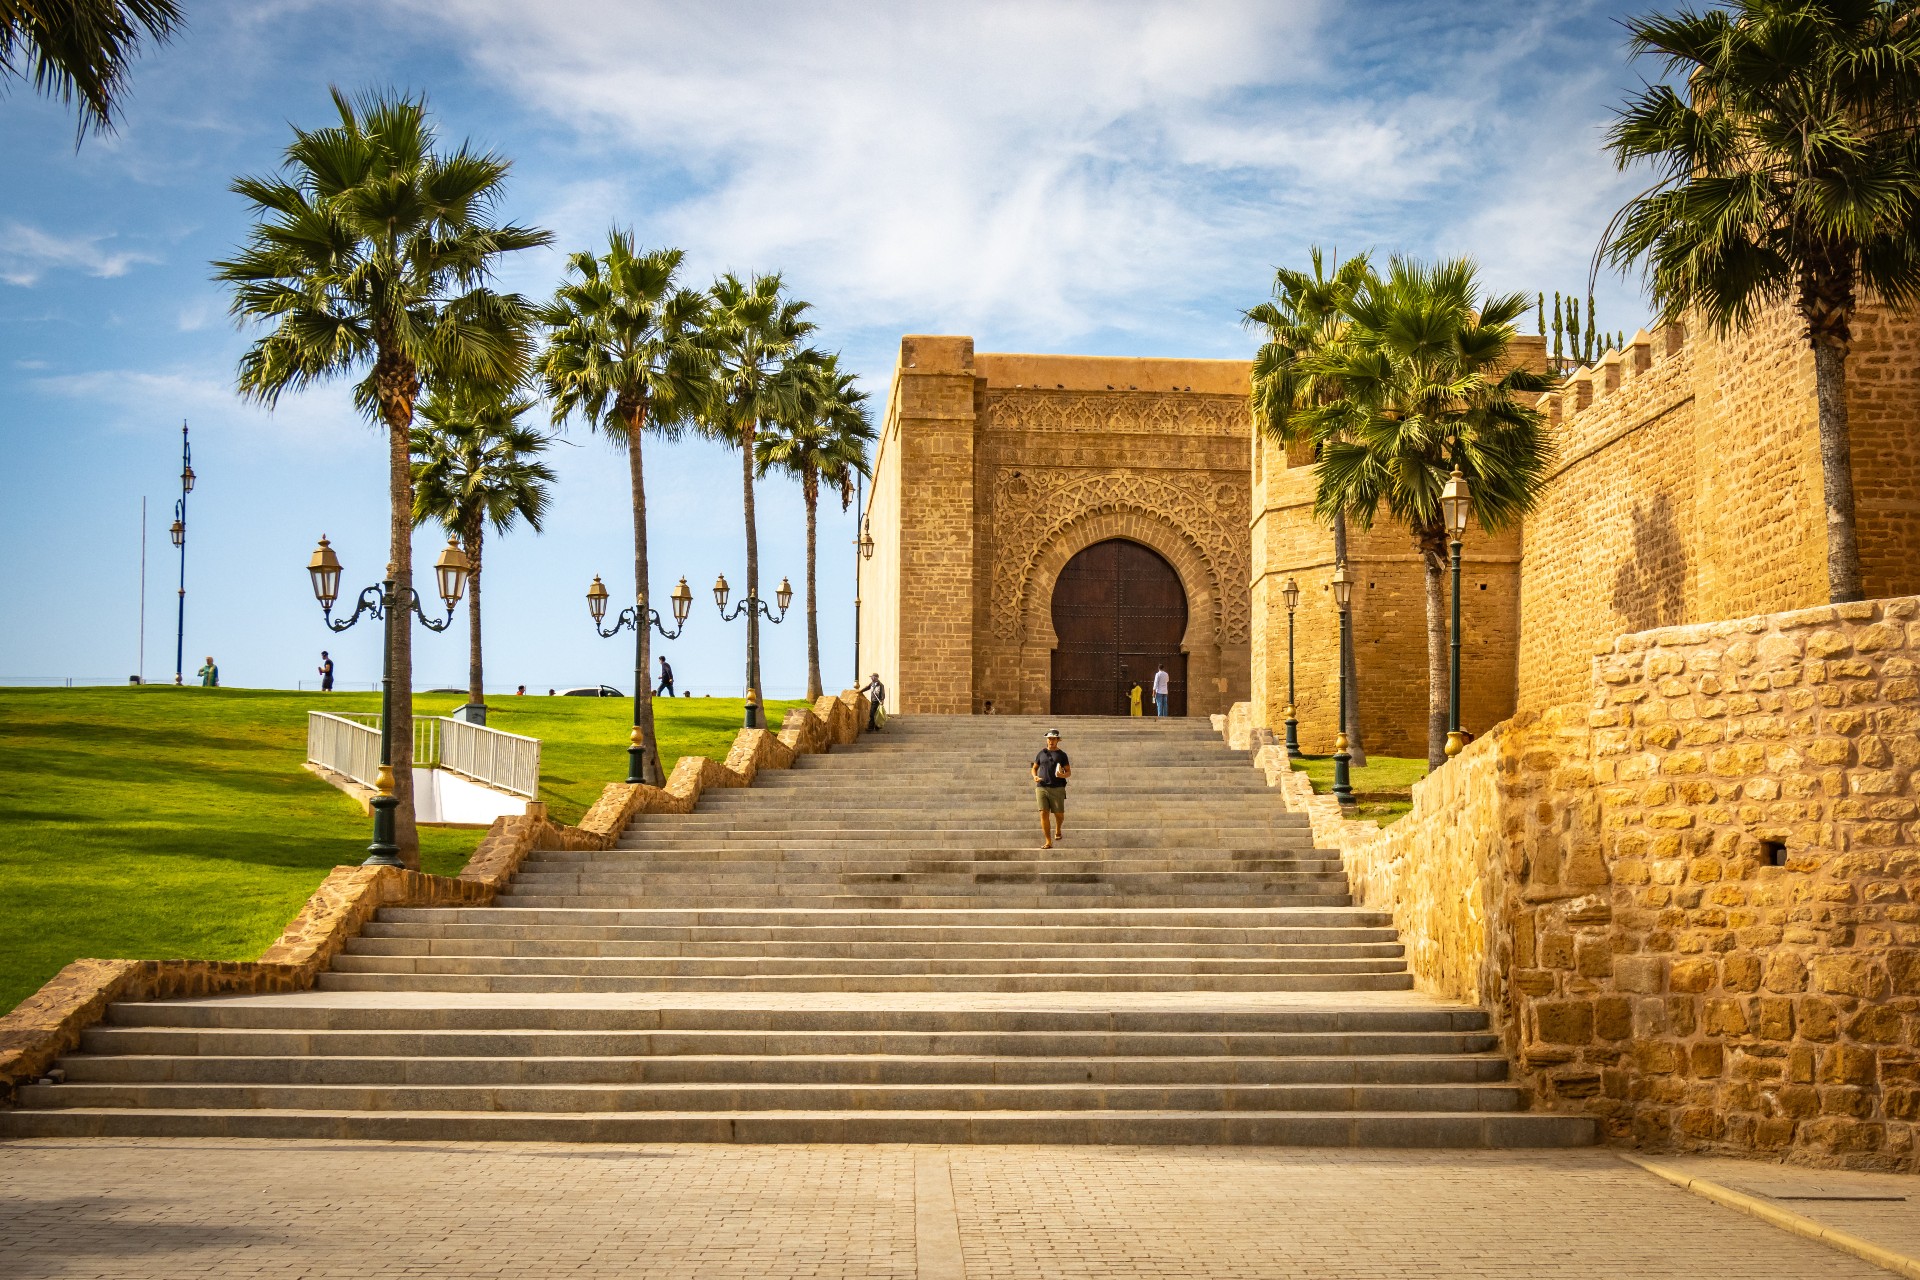 The Kasbah of the Udayas (Oudayas) ancient fortress in Rabat, Morocco